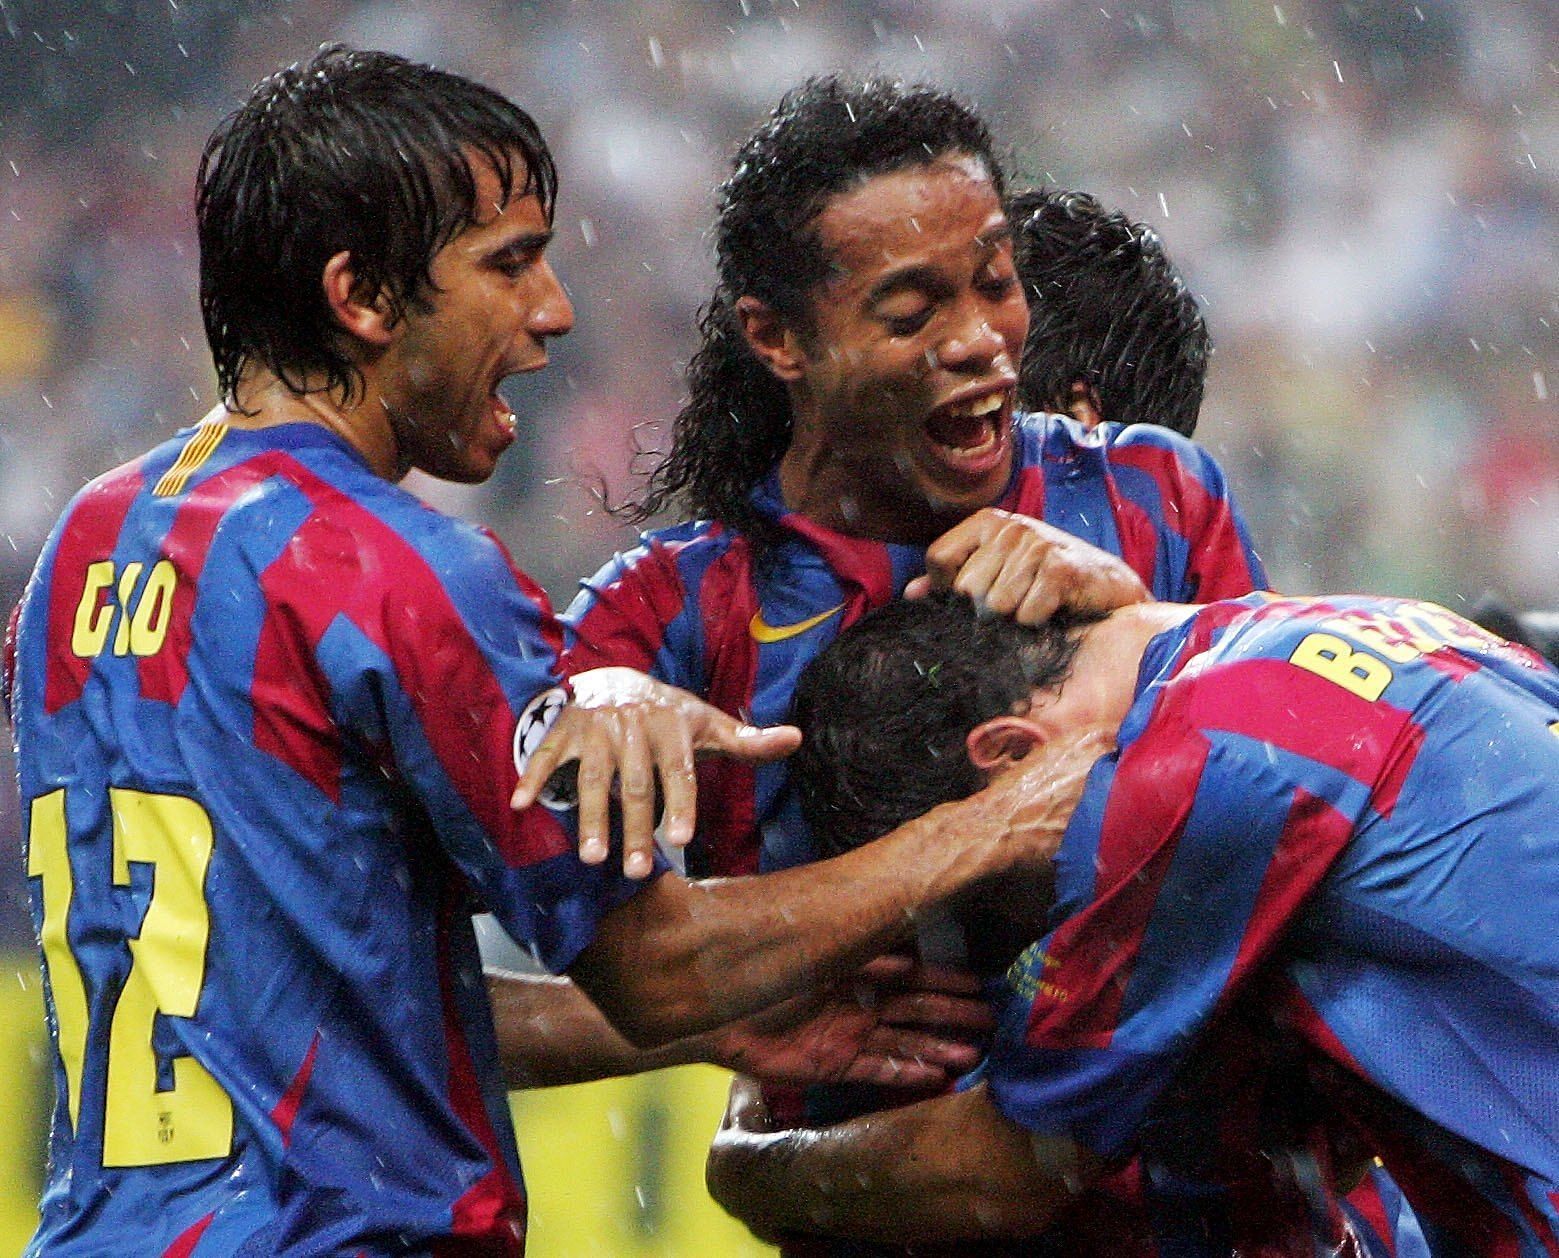 Barcelona players celebrate after scoring the winning goal